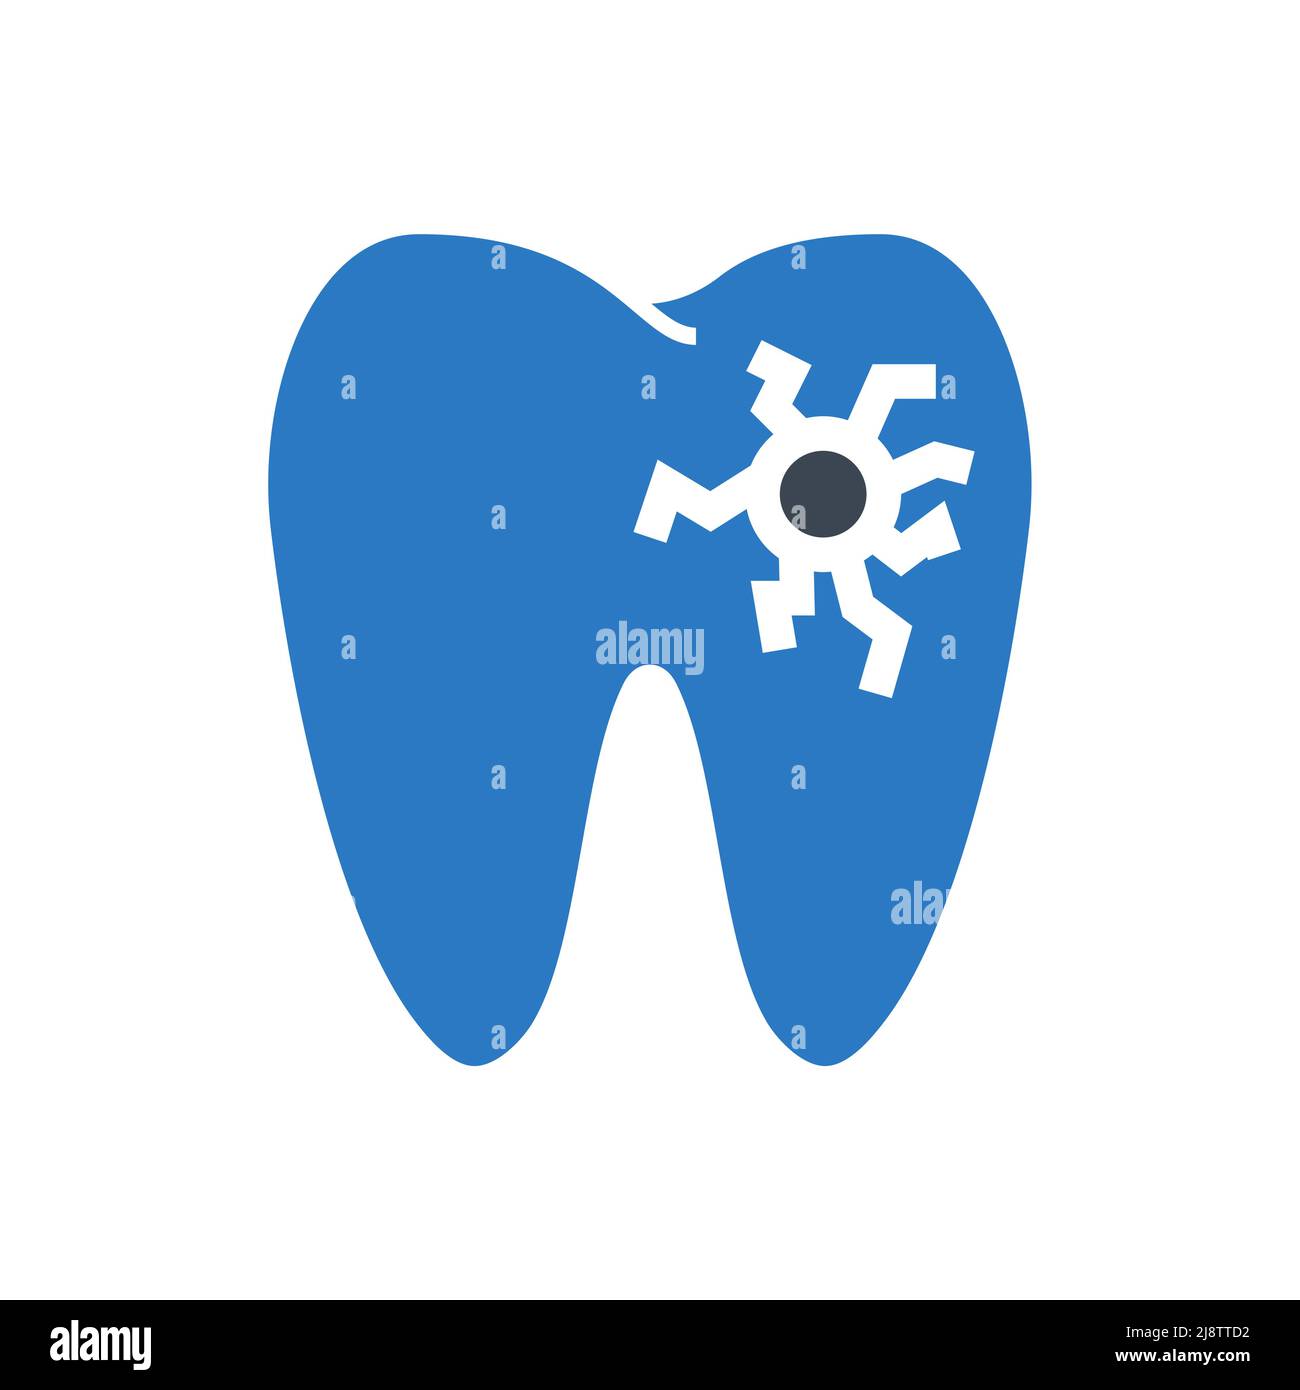 Caries Related Vector Glyph Icon. Caries sign. Tooth icon with lesion. Isolated on White Background Stock Vector